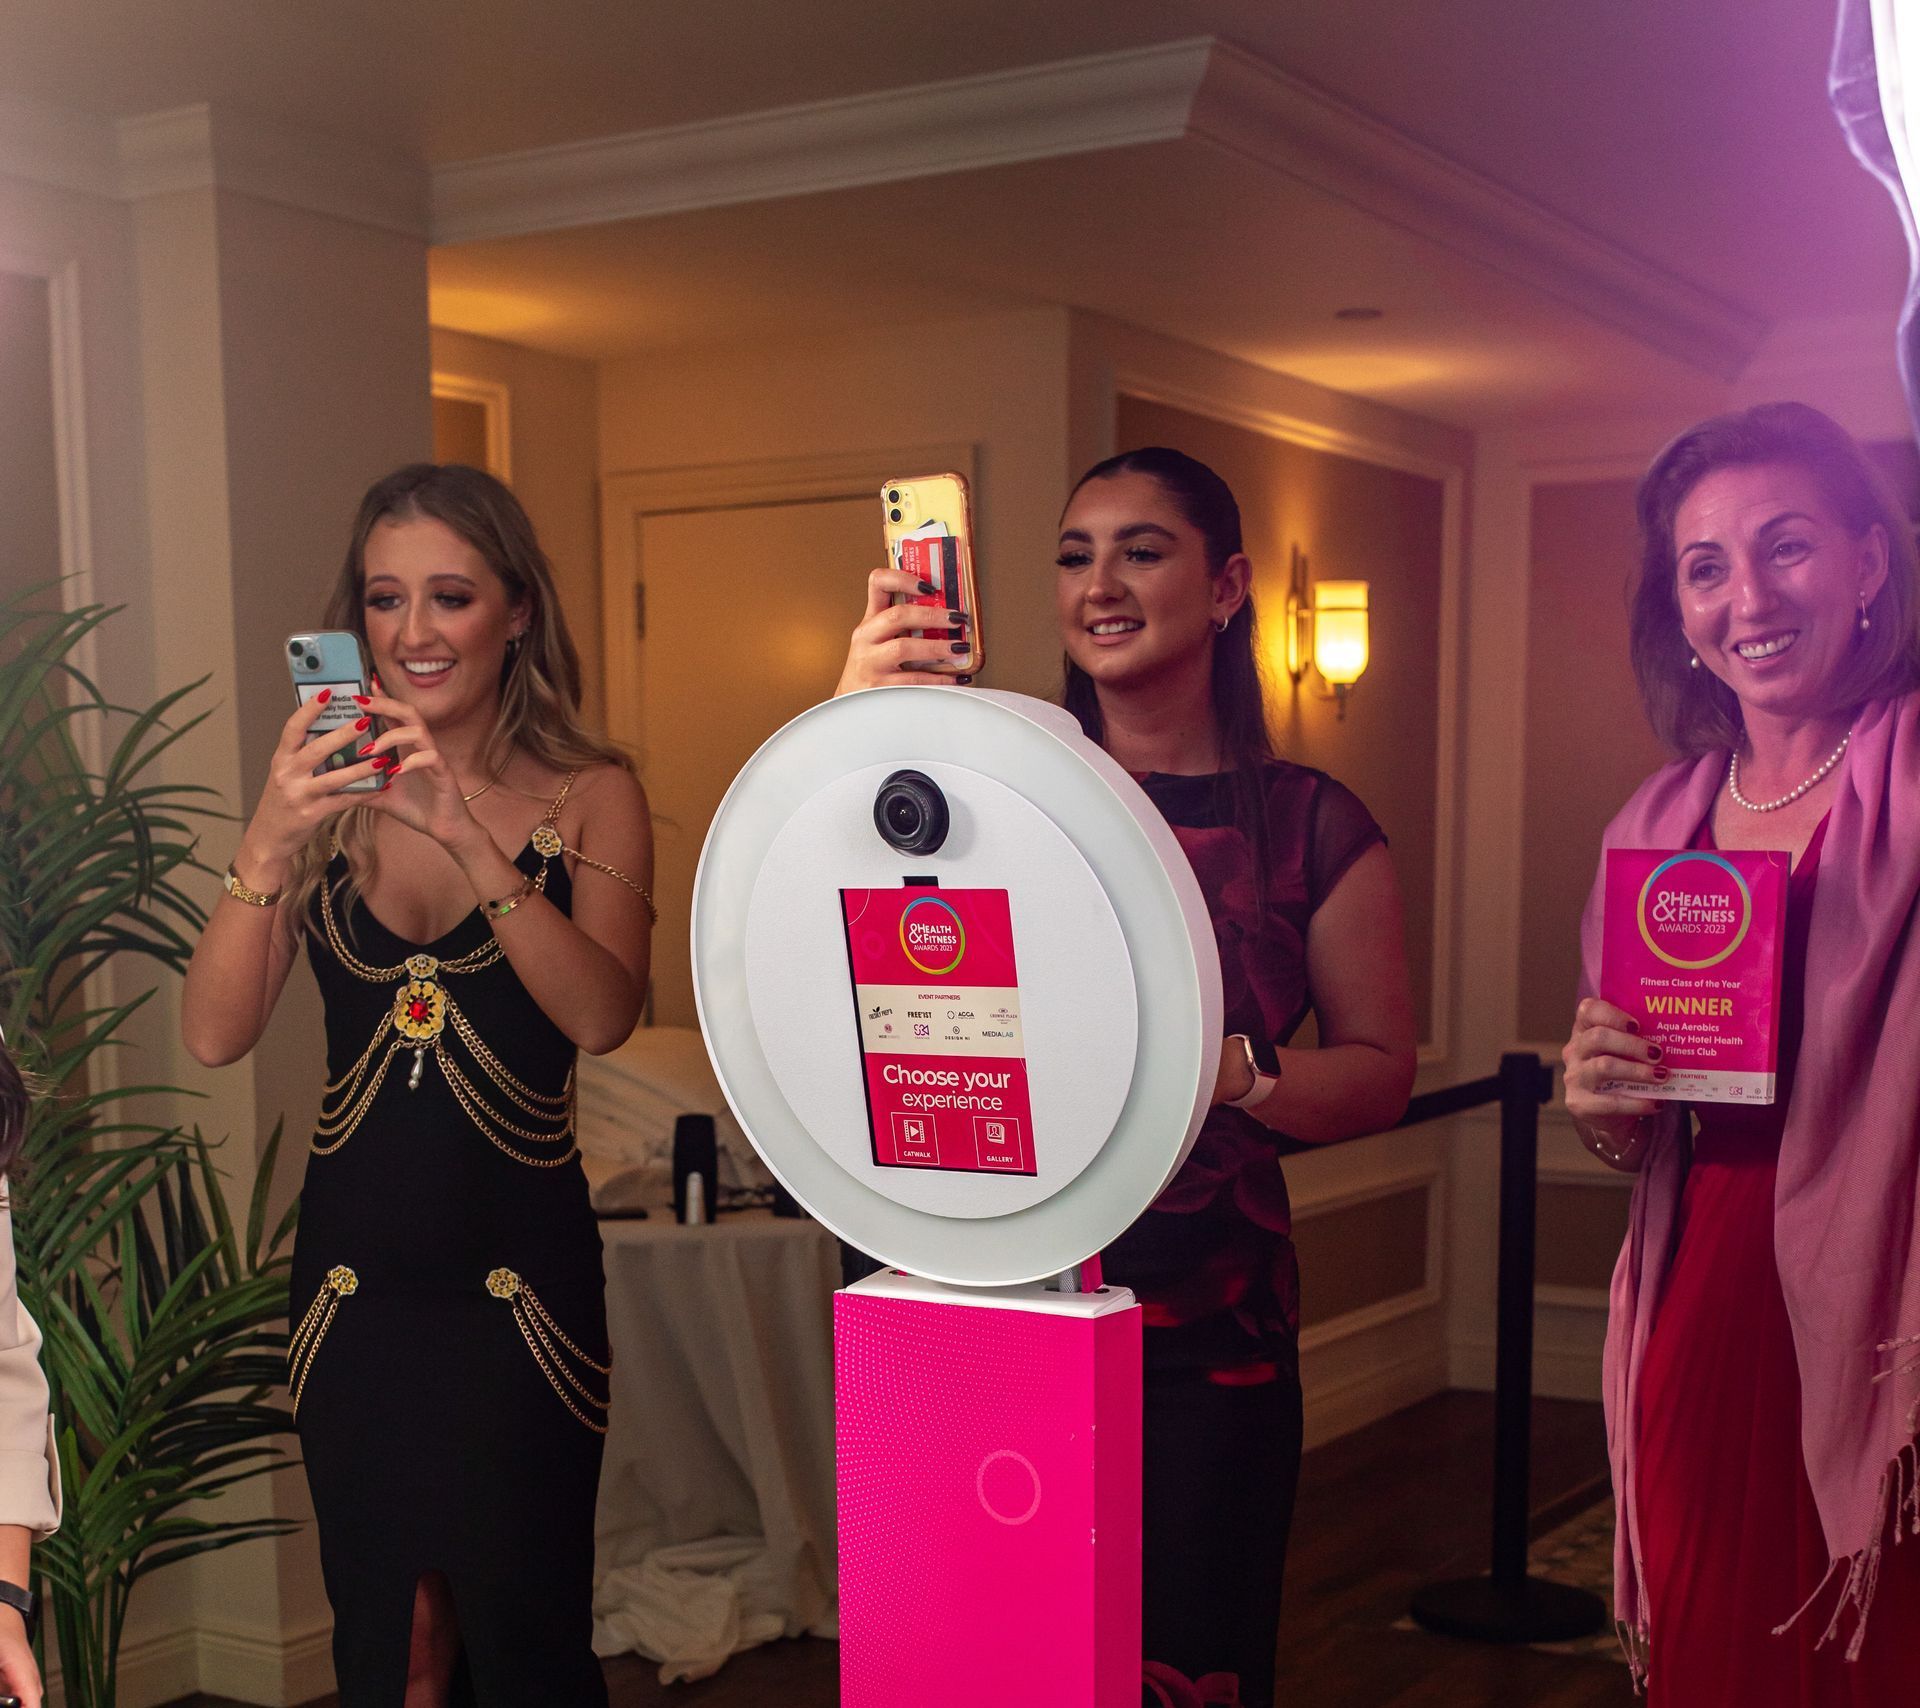 A promotional activation in Maryland uses a selfie picture booth from Flash Party.